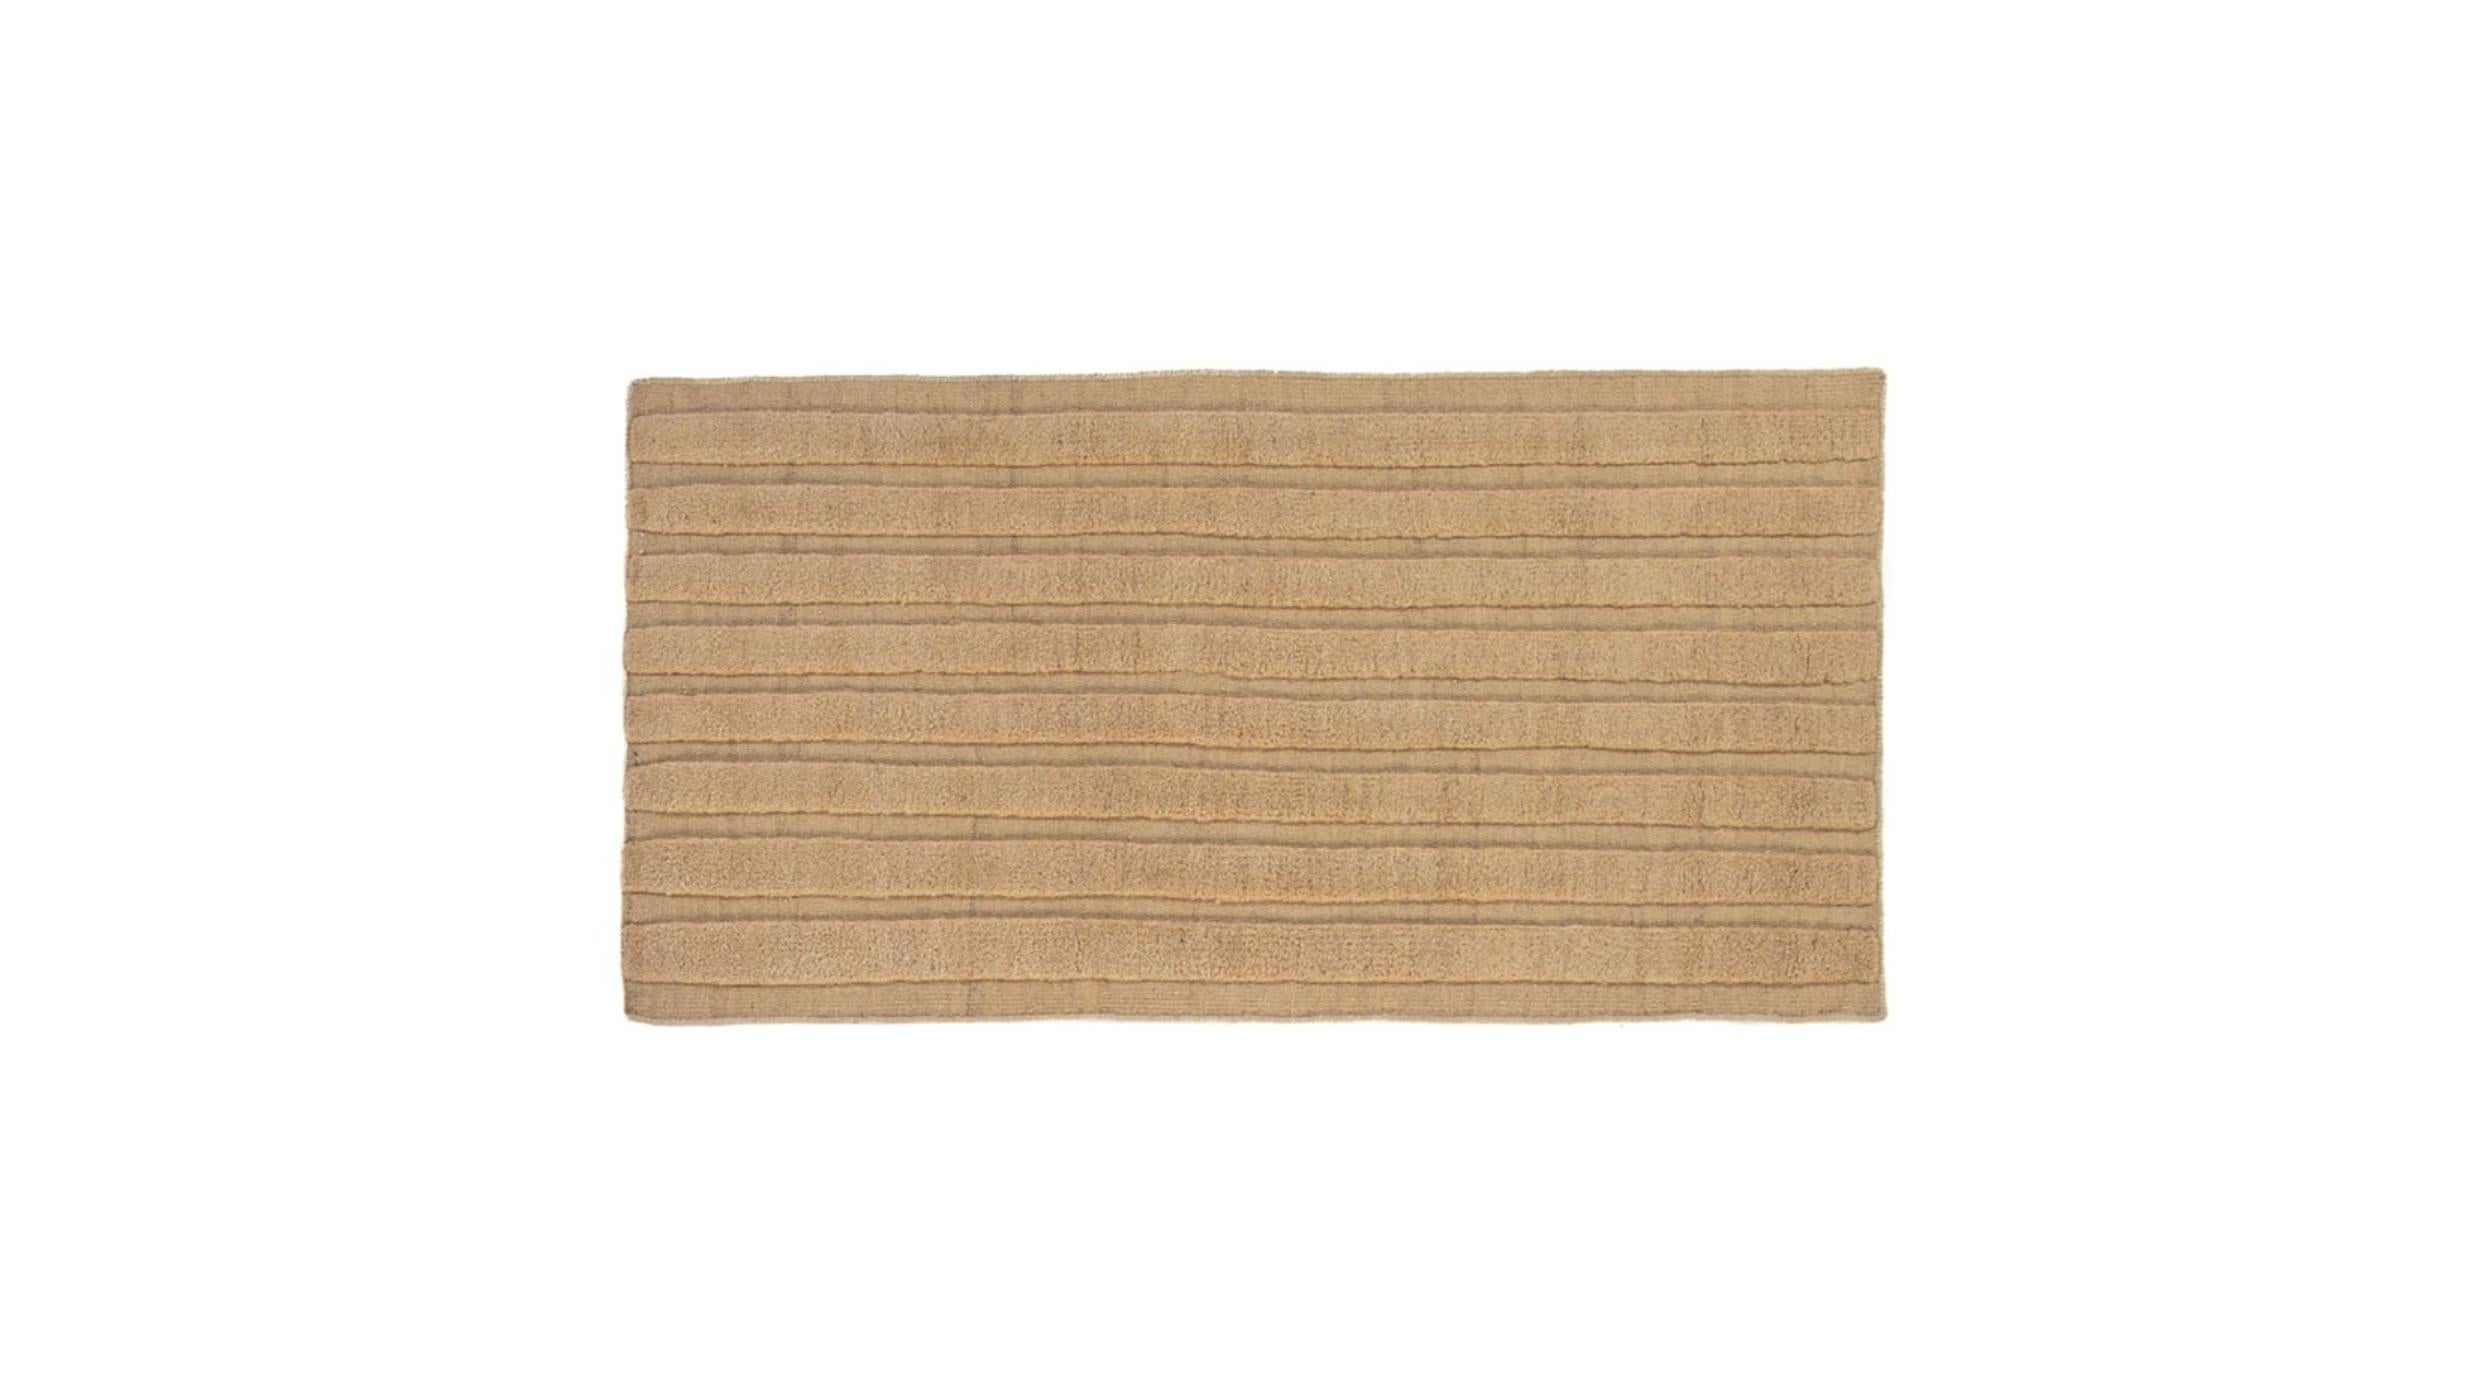 Gabbeh Interwoven with Kilim Rug by Taher Asad Bakhtiari
Dimensions: W 100 x L 195 cm
Materials: Wool

Taher Asad-Bakhtiari (B.1982, Tehran) is a self-taught artist whose practice focuses on, but is not limited to, objects, textiles and